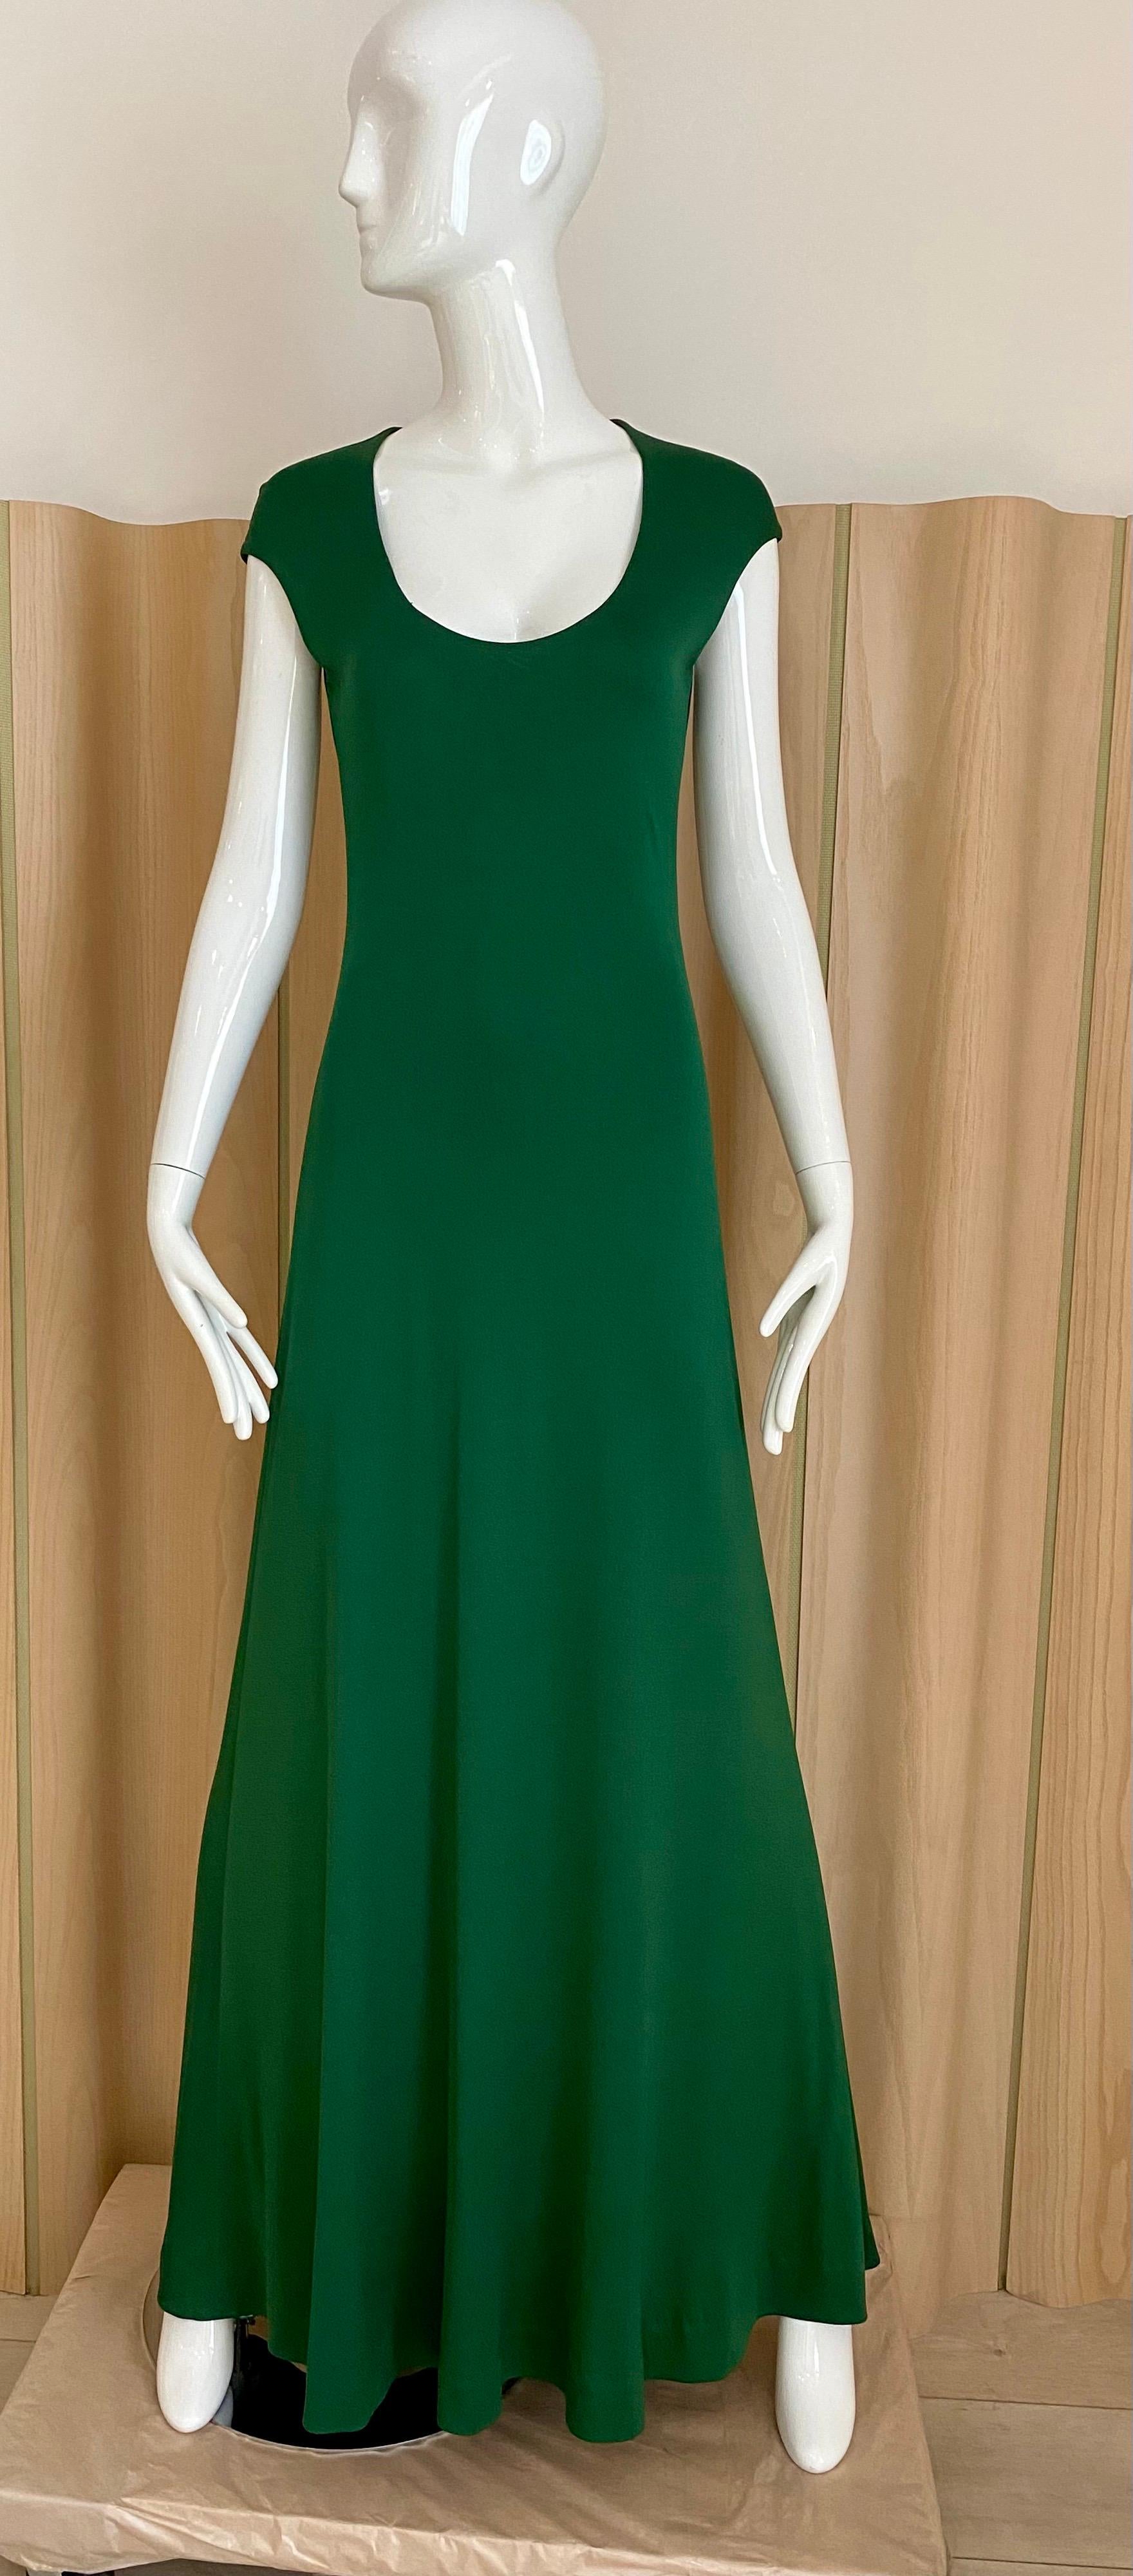 1970s Vintage HALSTON Green Matte Jersey Maxi Dress with Cape
Cap sleeves maxi dress. matte Jersey
Size : fit 2/4/6 small - medium
Measurement :
Bust : 32” stretch to 36”
Waist: 28” stretch to 30”
Hip: 38”/ Dress length: 60”